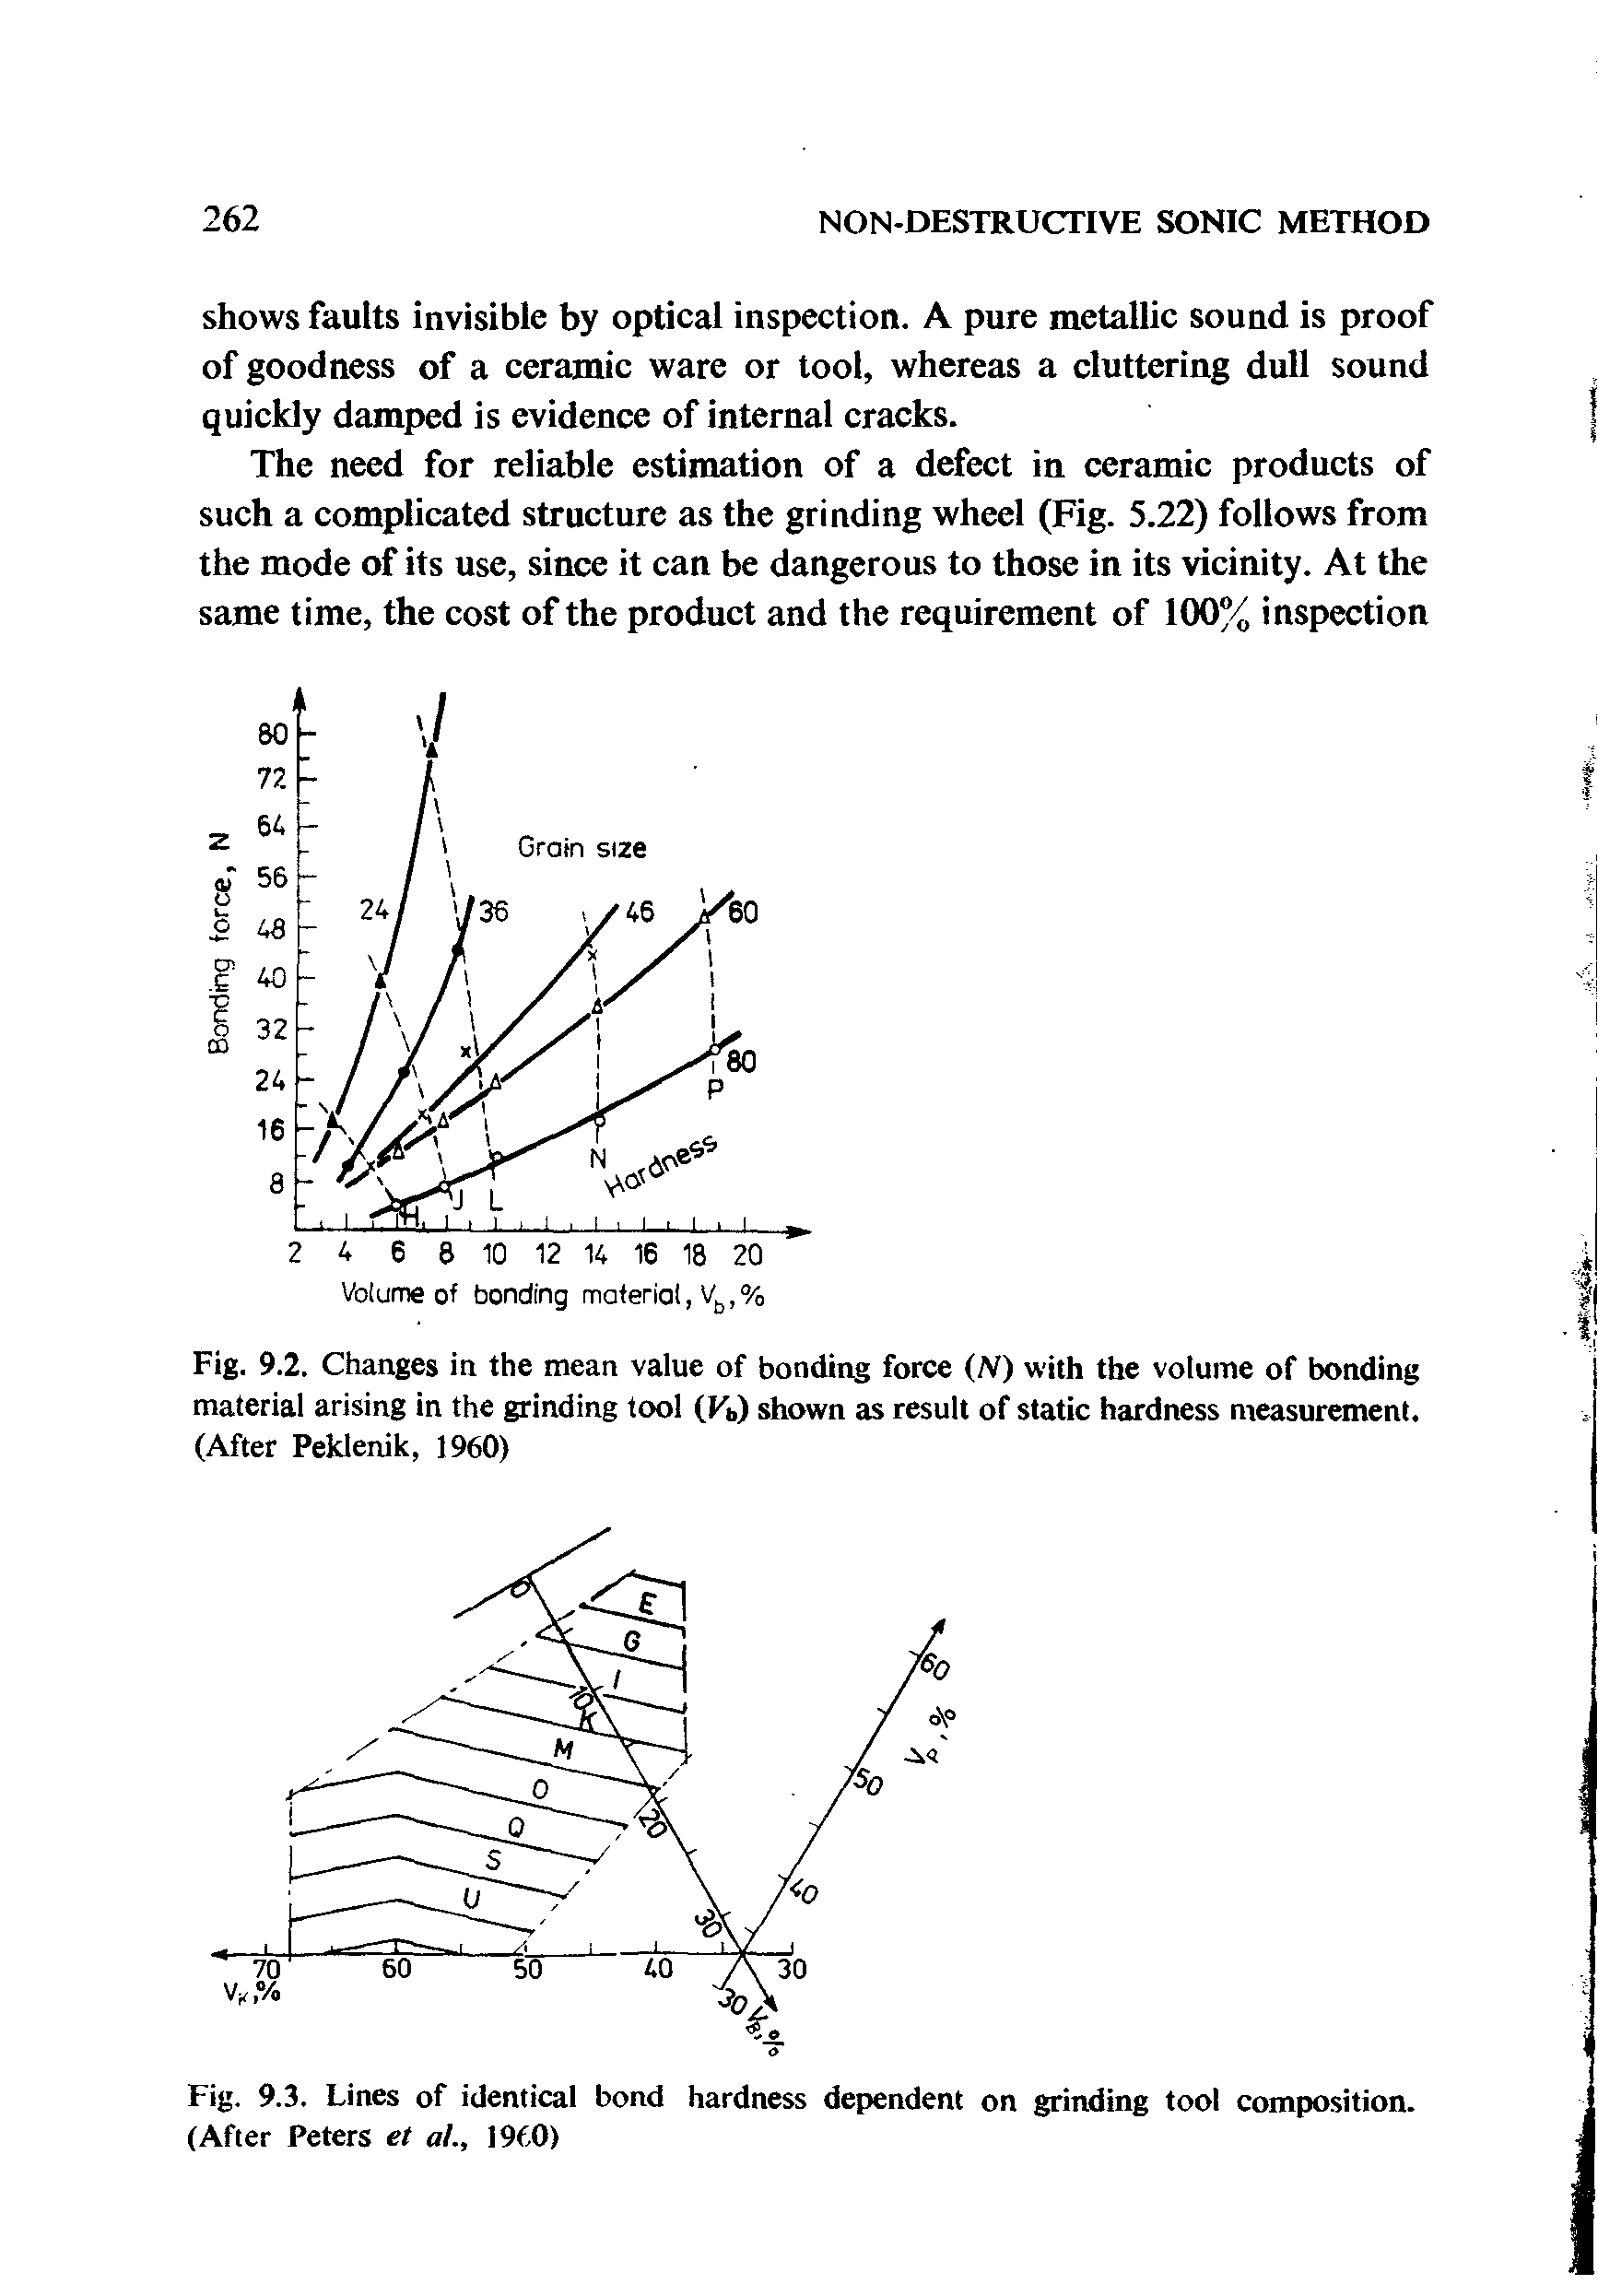 Fig. 9.3. Lines of identical bond hardness dependent on grinding tool composition. (After Peters et a ., 1960)...